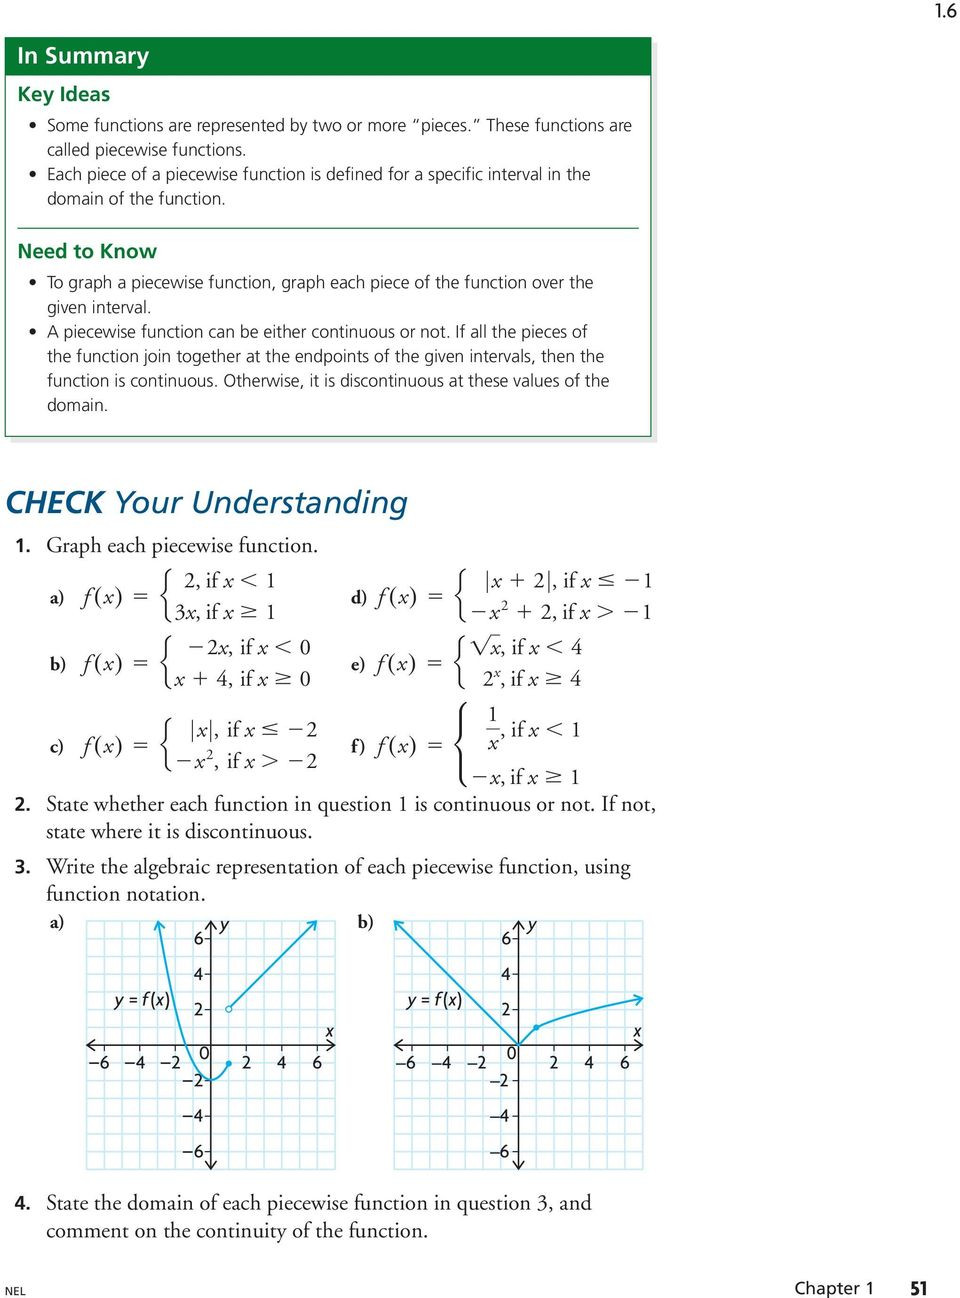 Worksheet Piecewise Functions Answer Key 1 6 Piecewise Functions Learn About the Math Representing